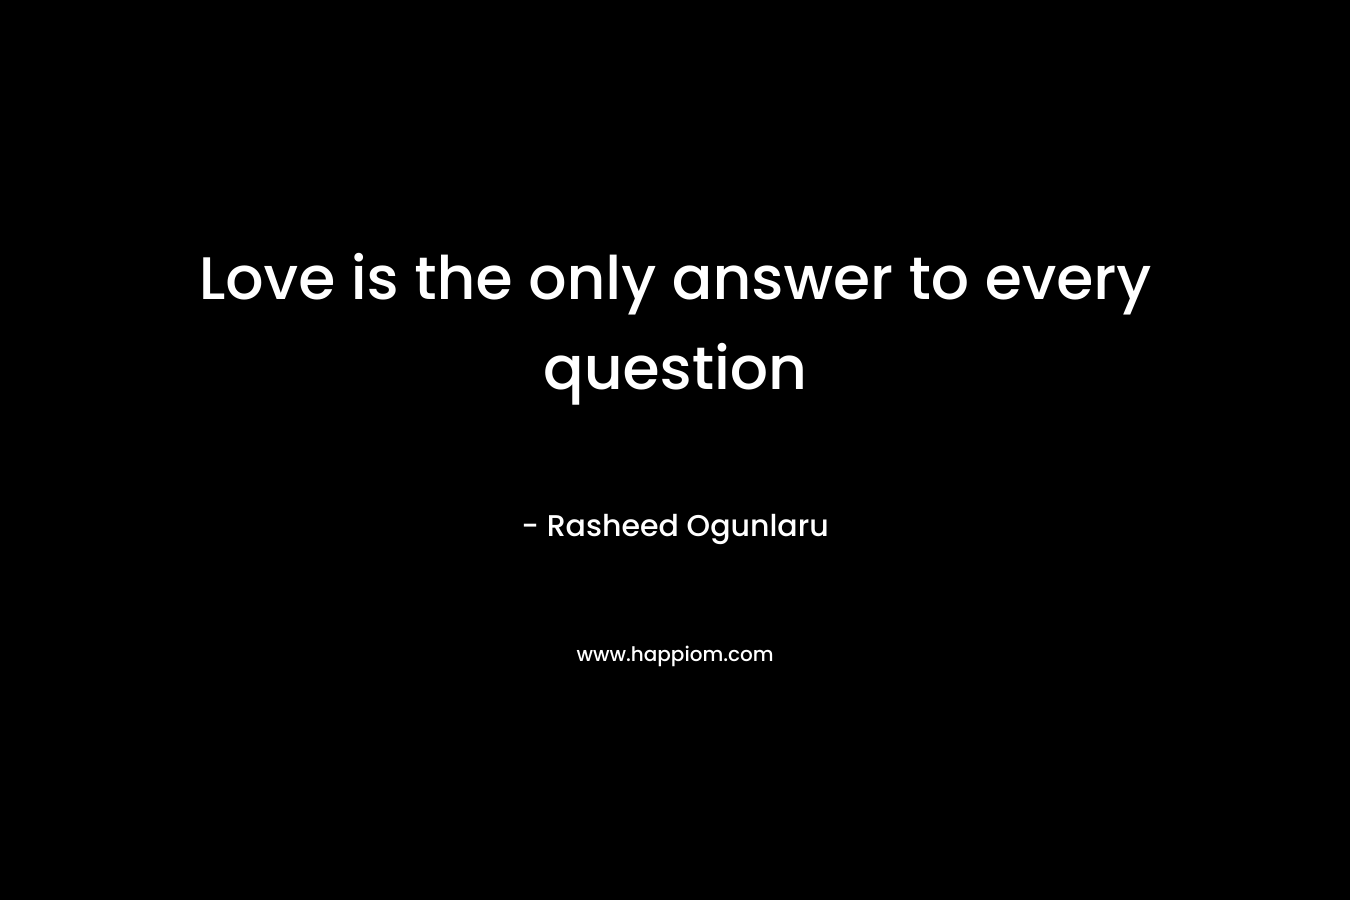 Love is the only answer to every question